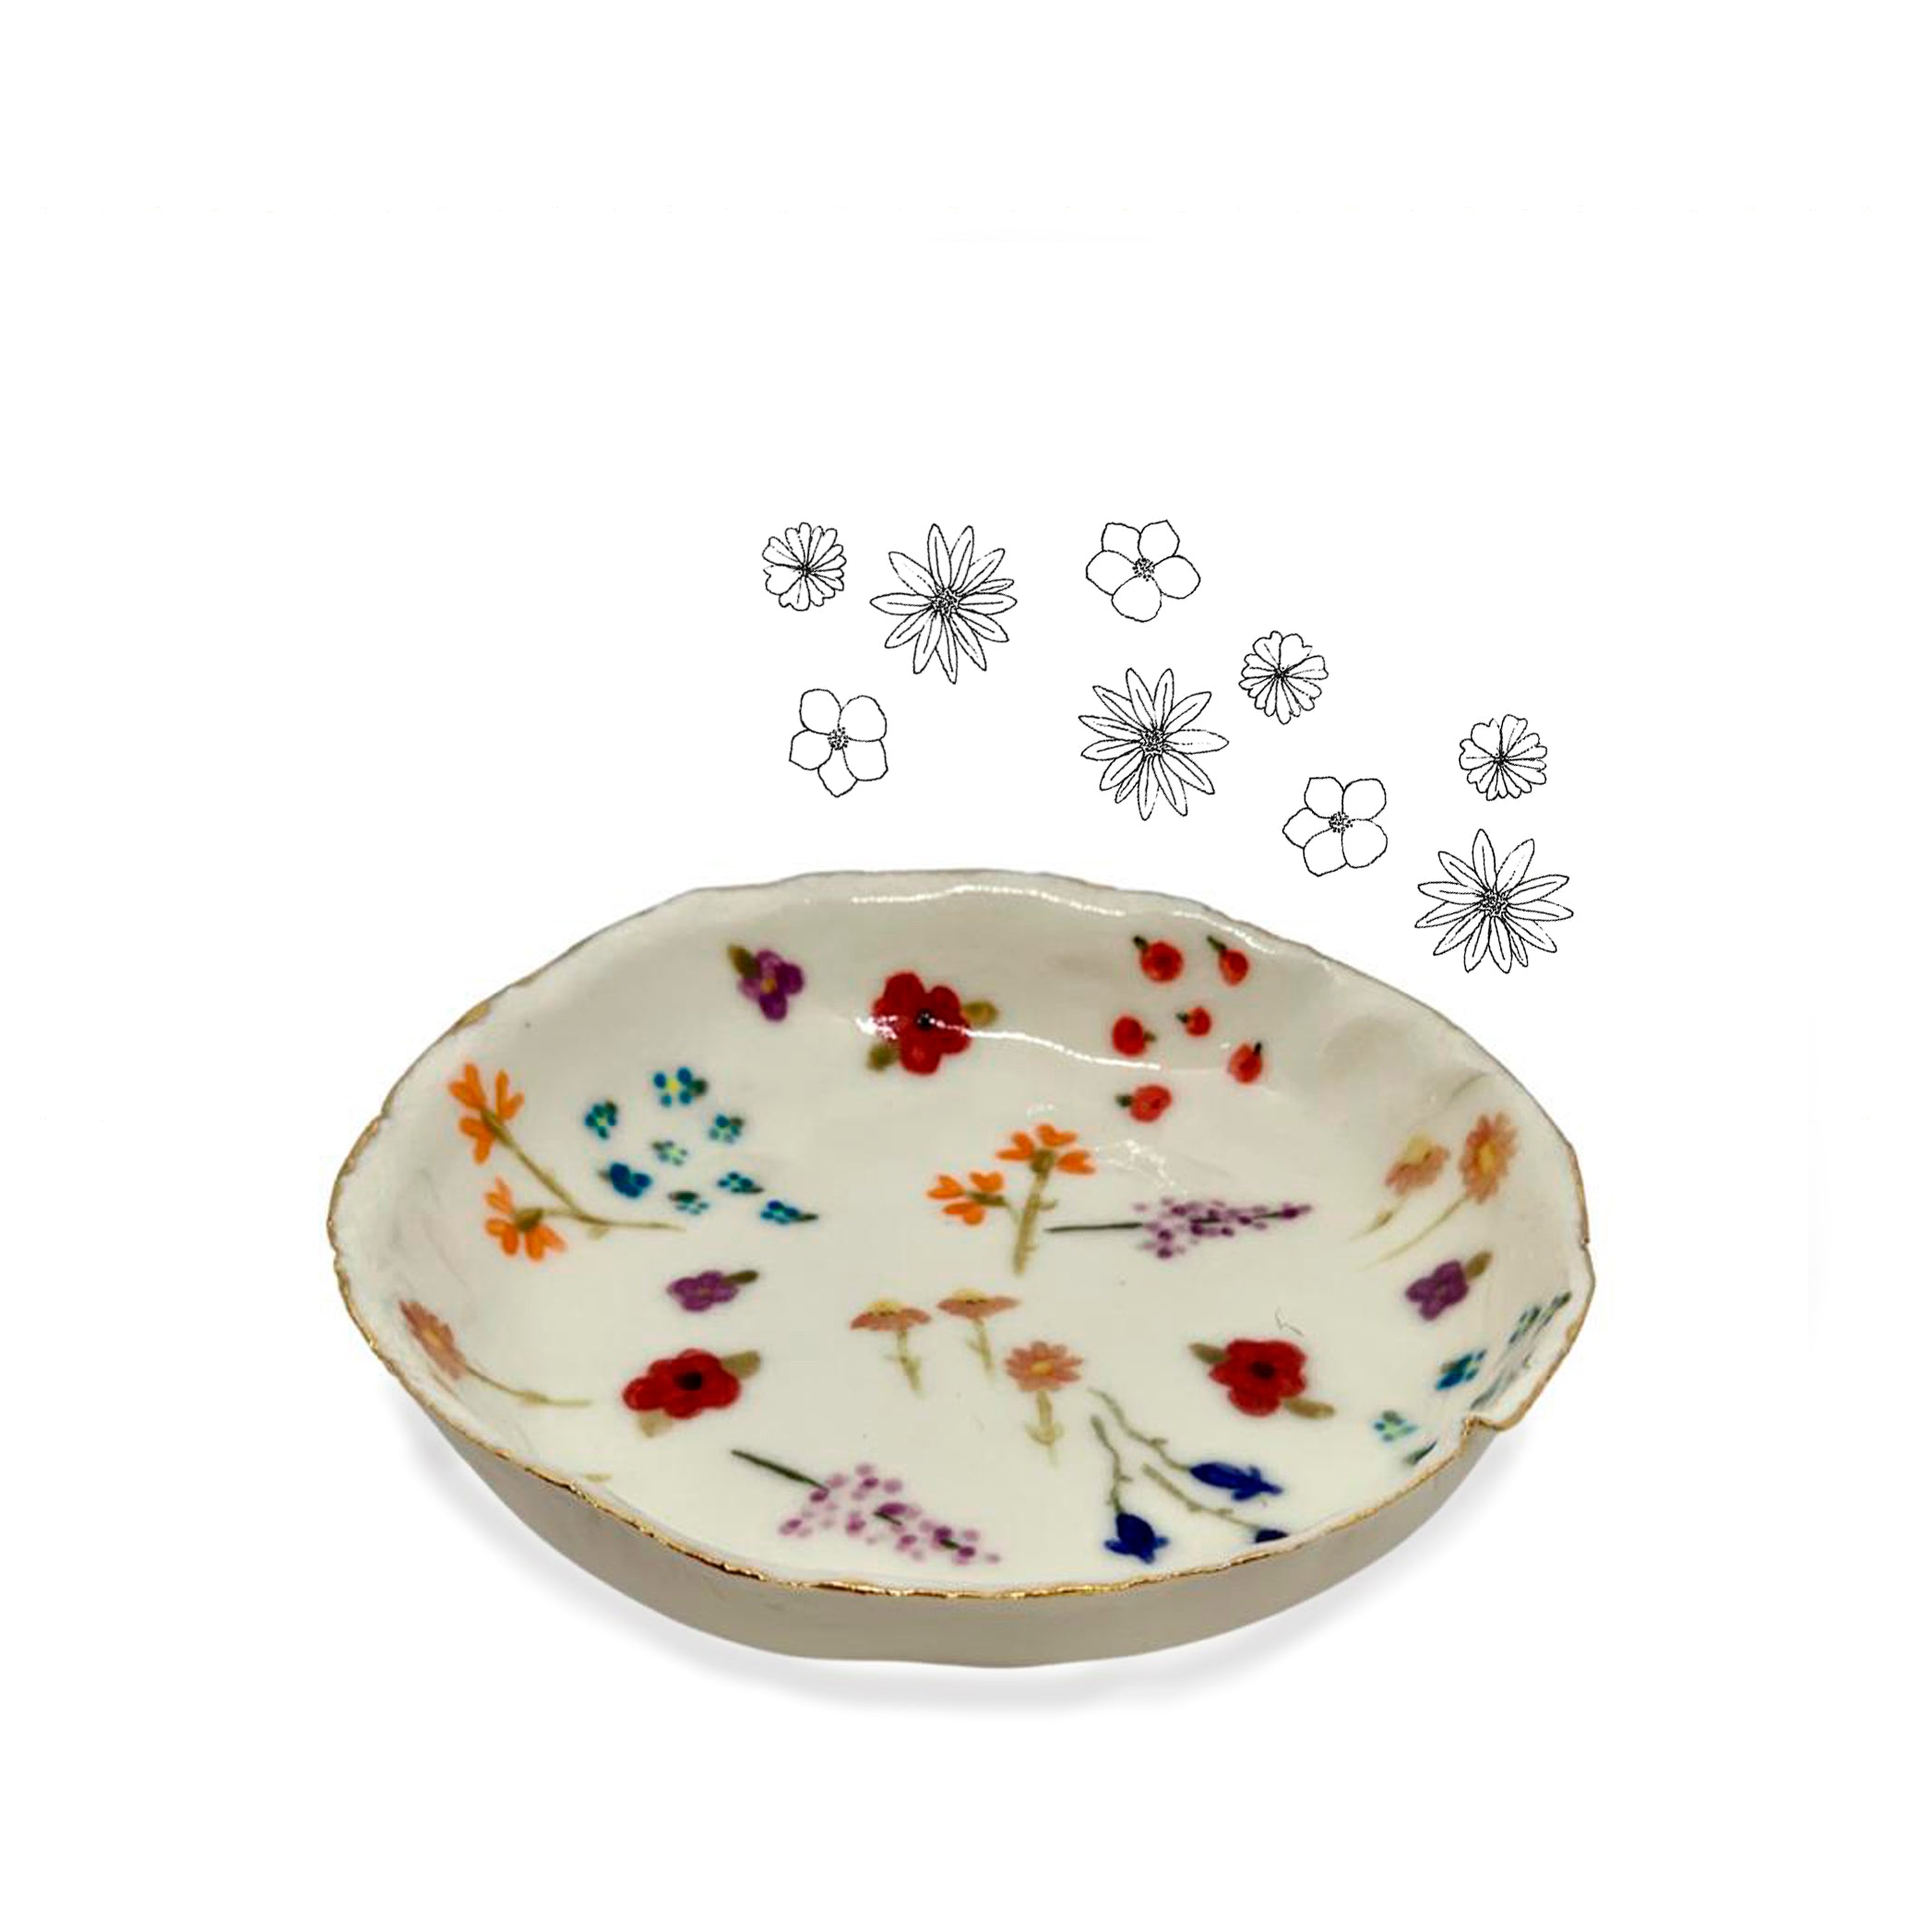 HB Jagged Bowl with Hand Painted Florals, 14cm